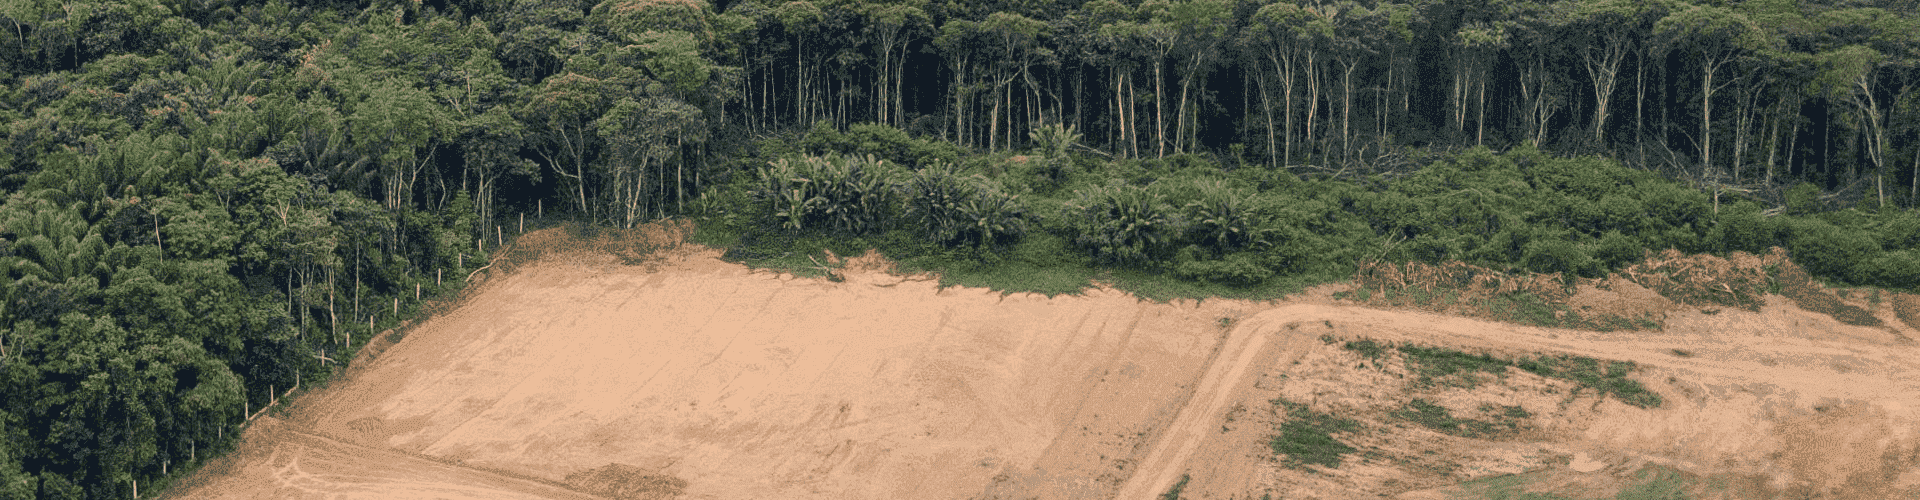 Aerial view of deforestation of Amazon rainforest. Forest trees destroyed to open land for commercial area.